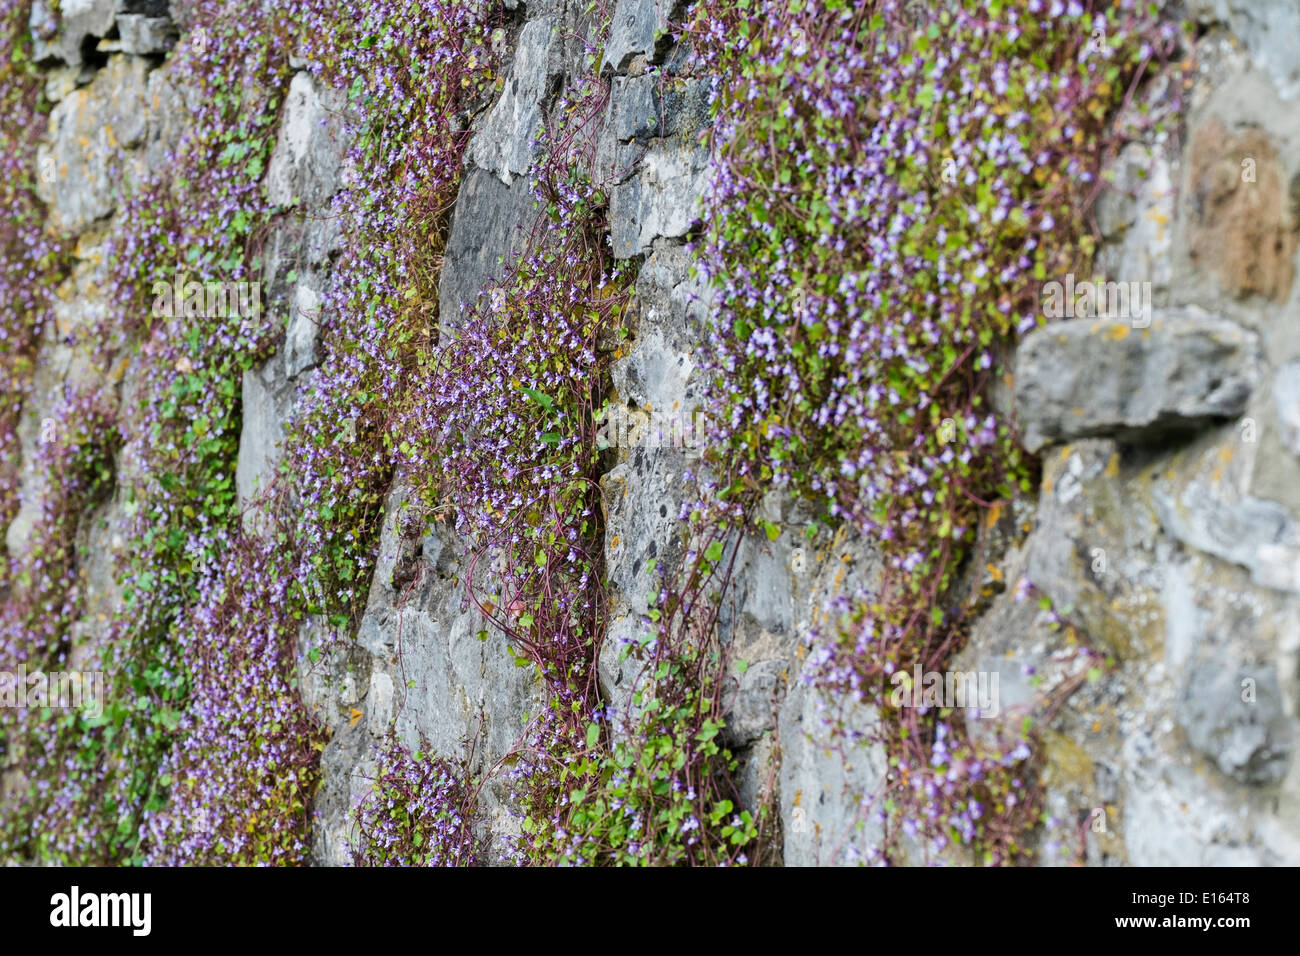 Cymbalaria muralis, ivy-leaved toadflax or Kenilworth ivy, growing on stone wall. Stock Photo